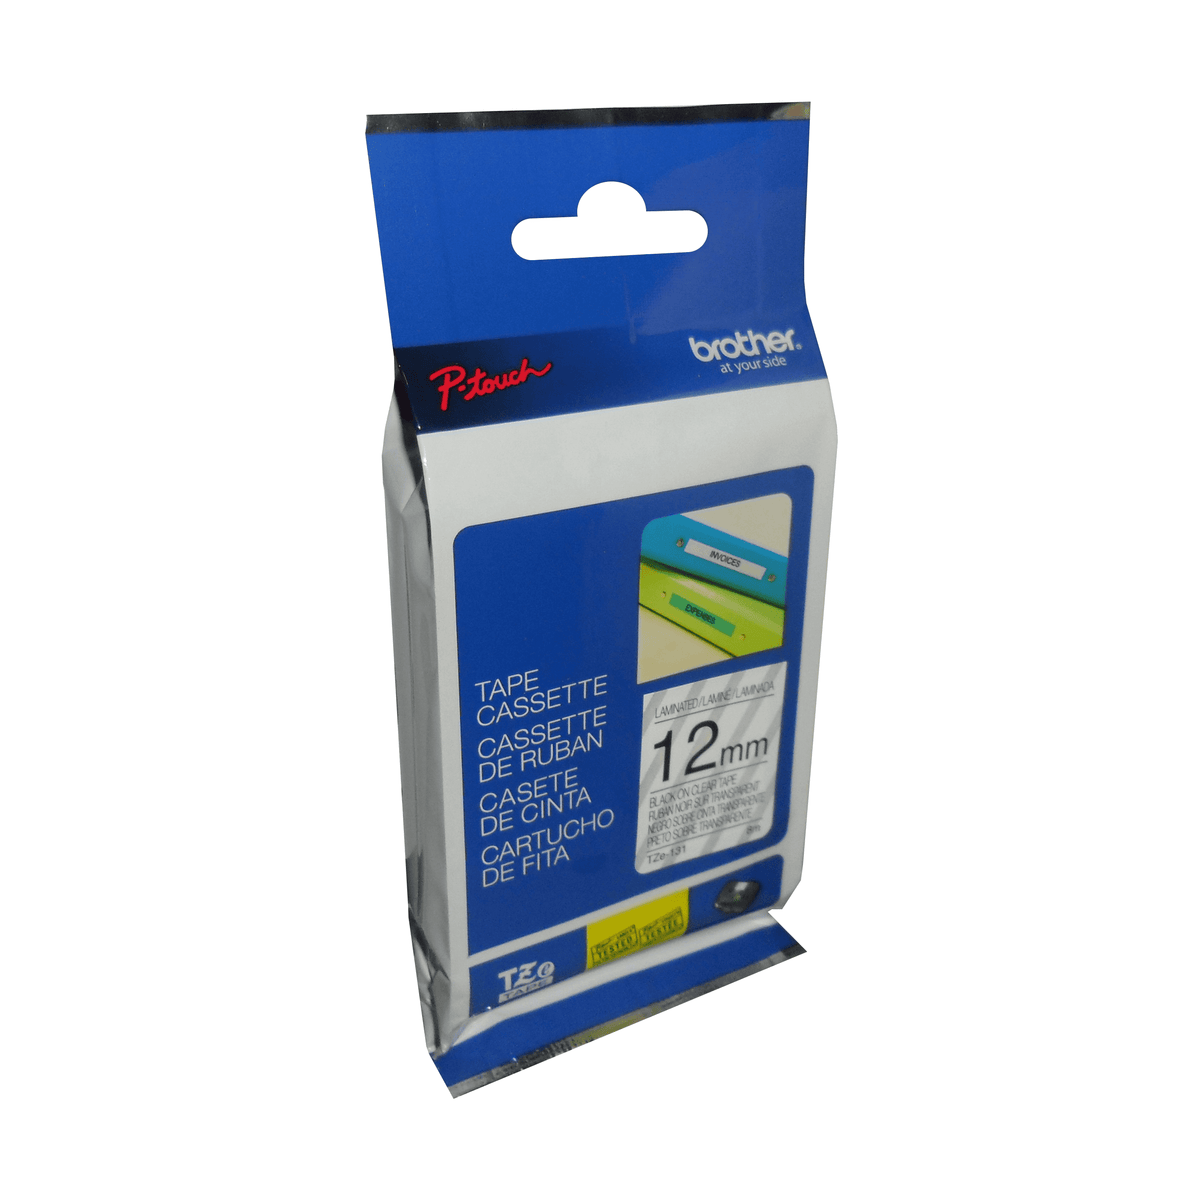 Brother Genuine TZe131 Black on Clear Laminated Tape for P-touch Label Makers, 12 mm wide x 8 m long